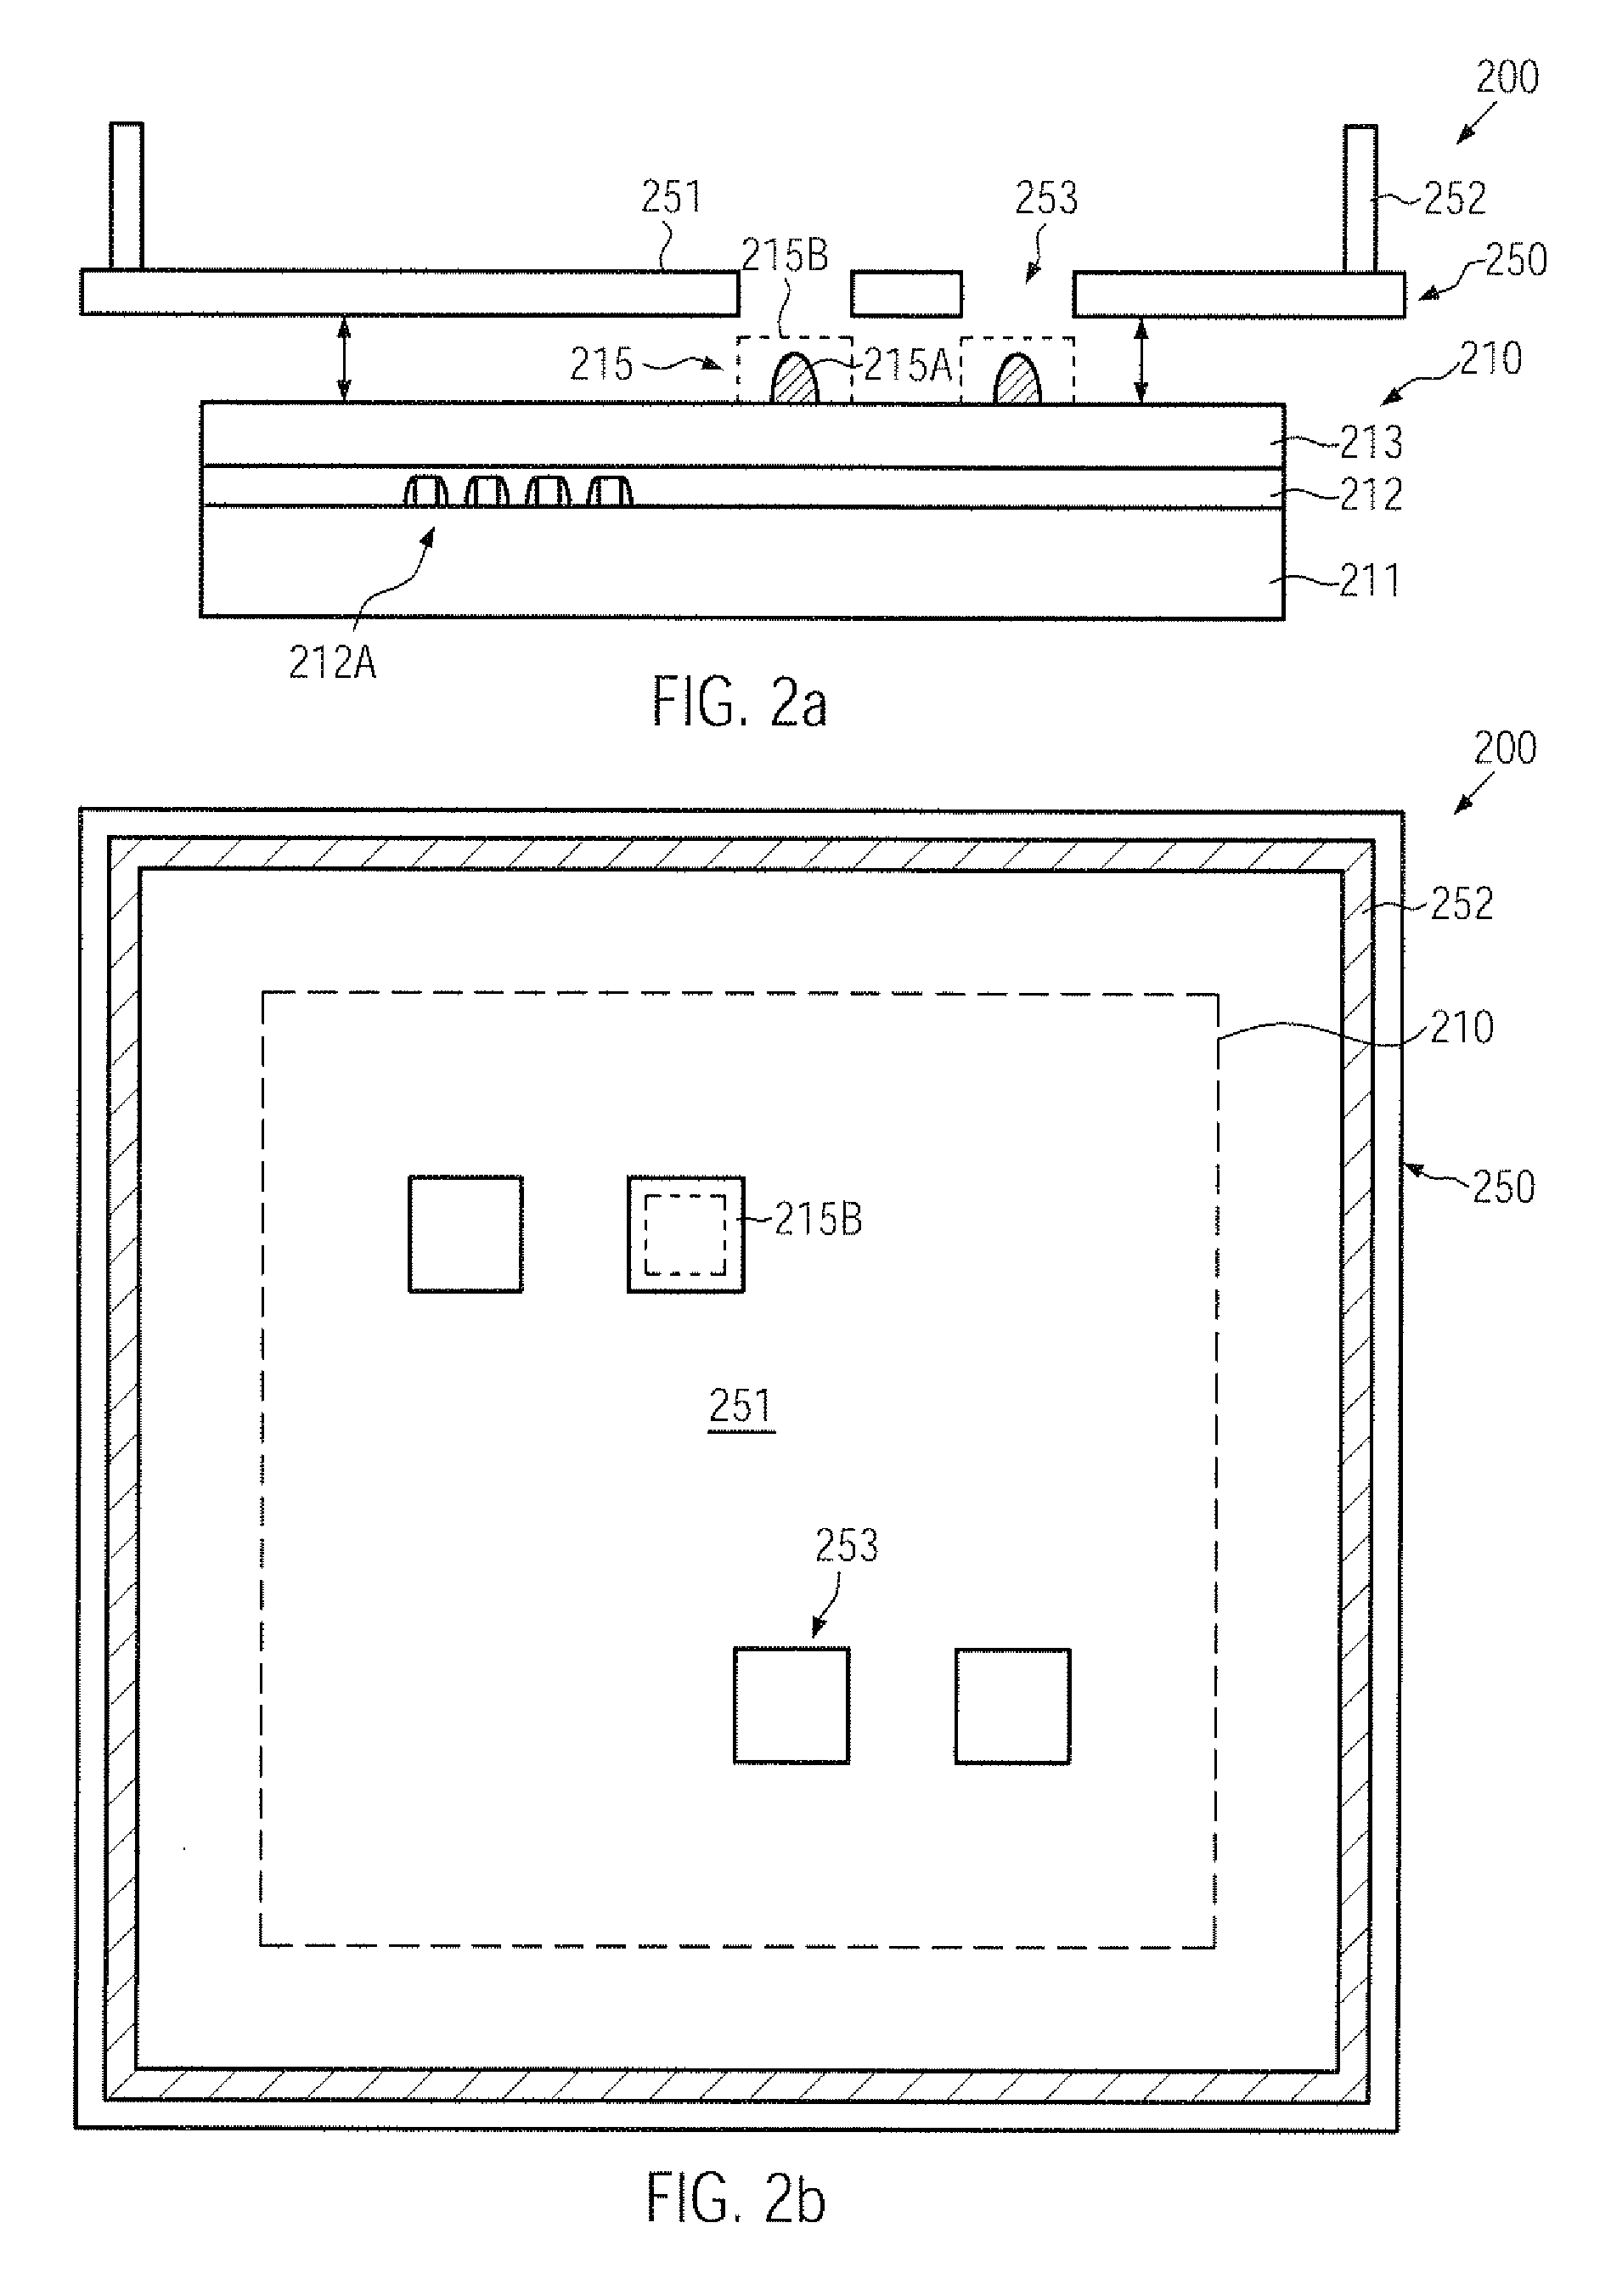 3-d integrated semiconductor device comprising intermediate heat spreading capabilities